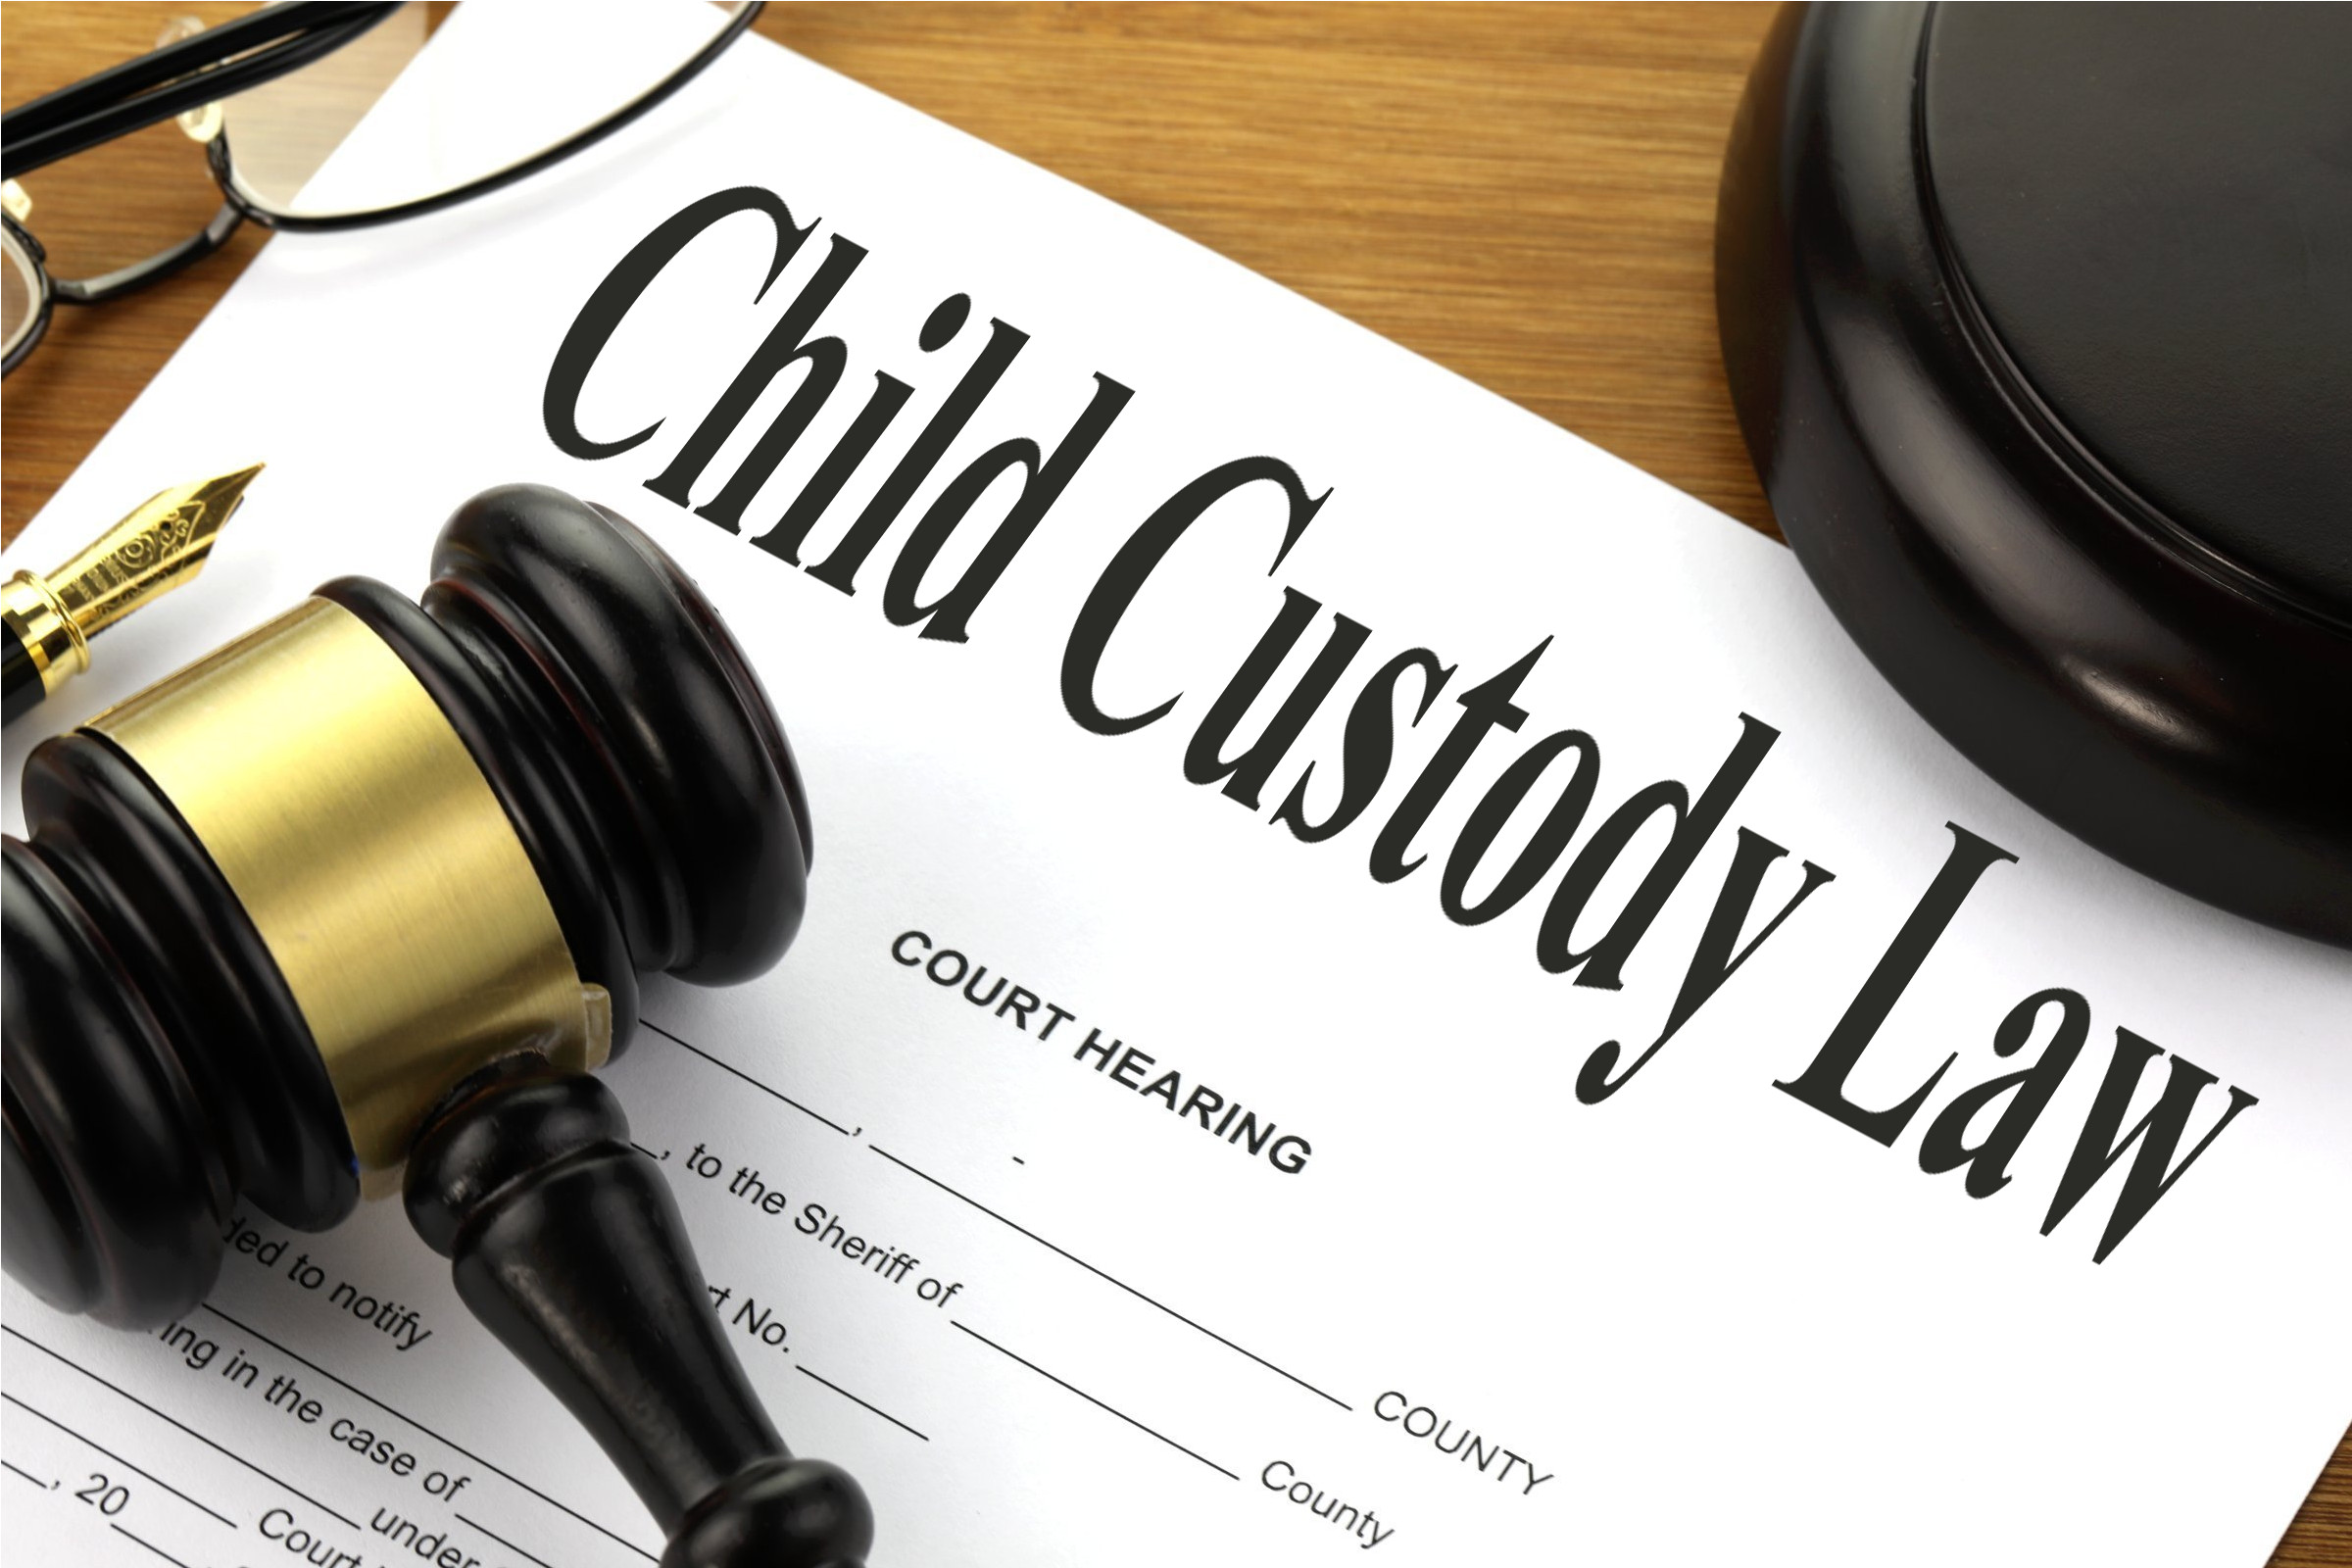 Child Custody Law Free of Charge Creative Commons Legal 1 image